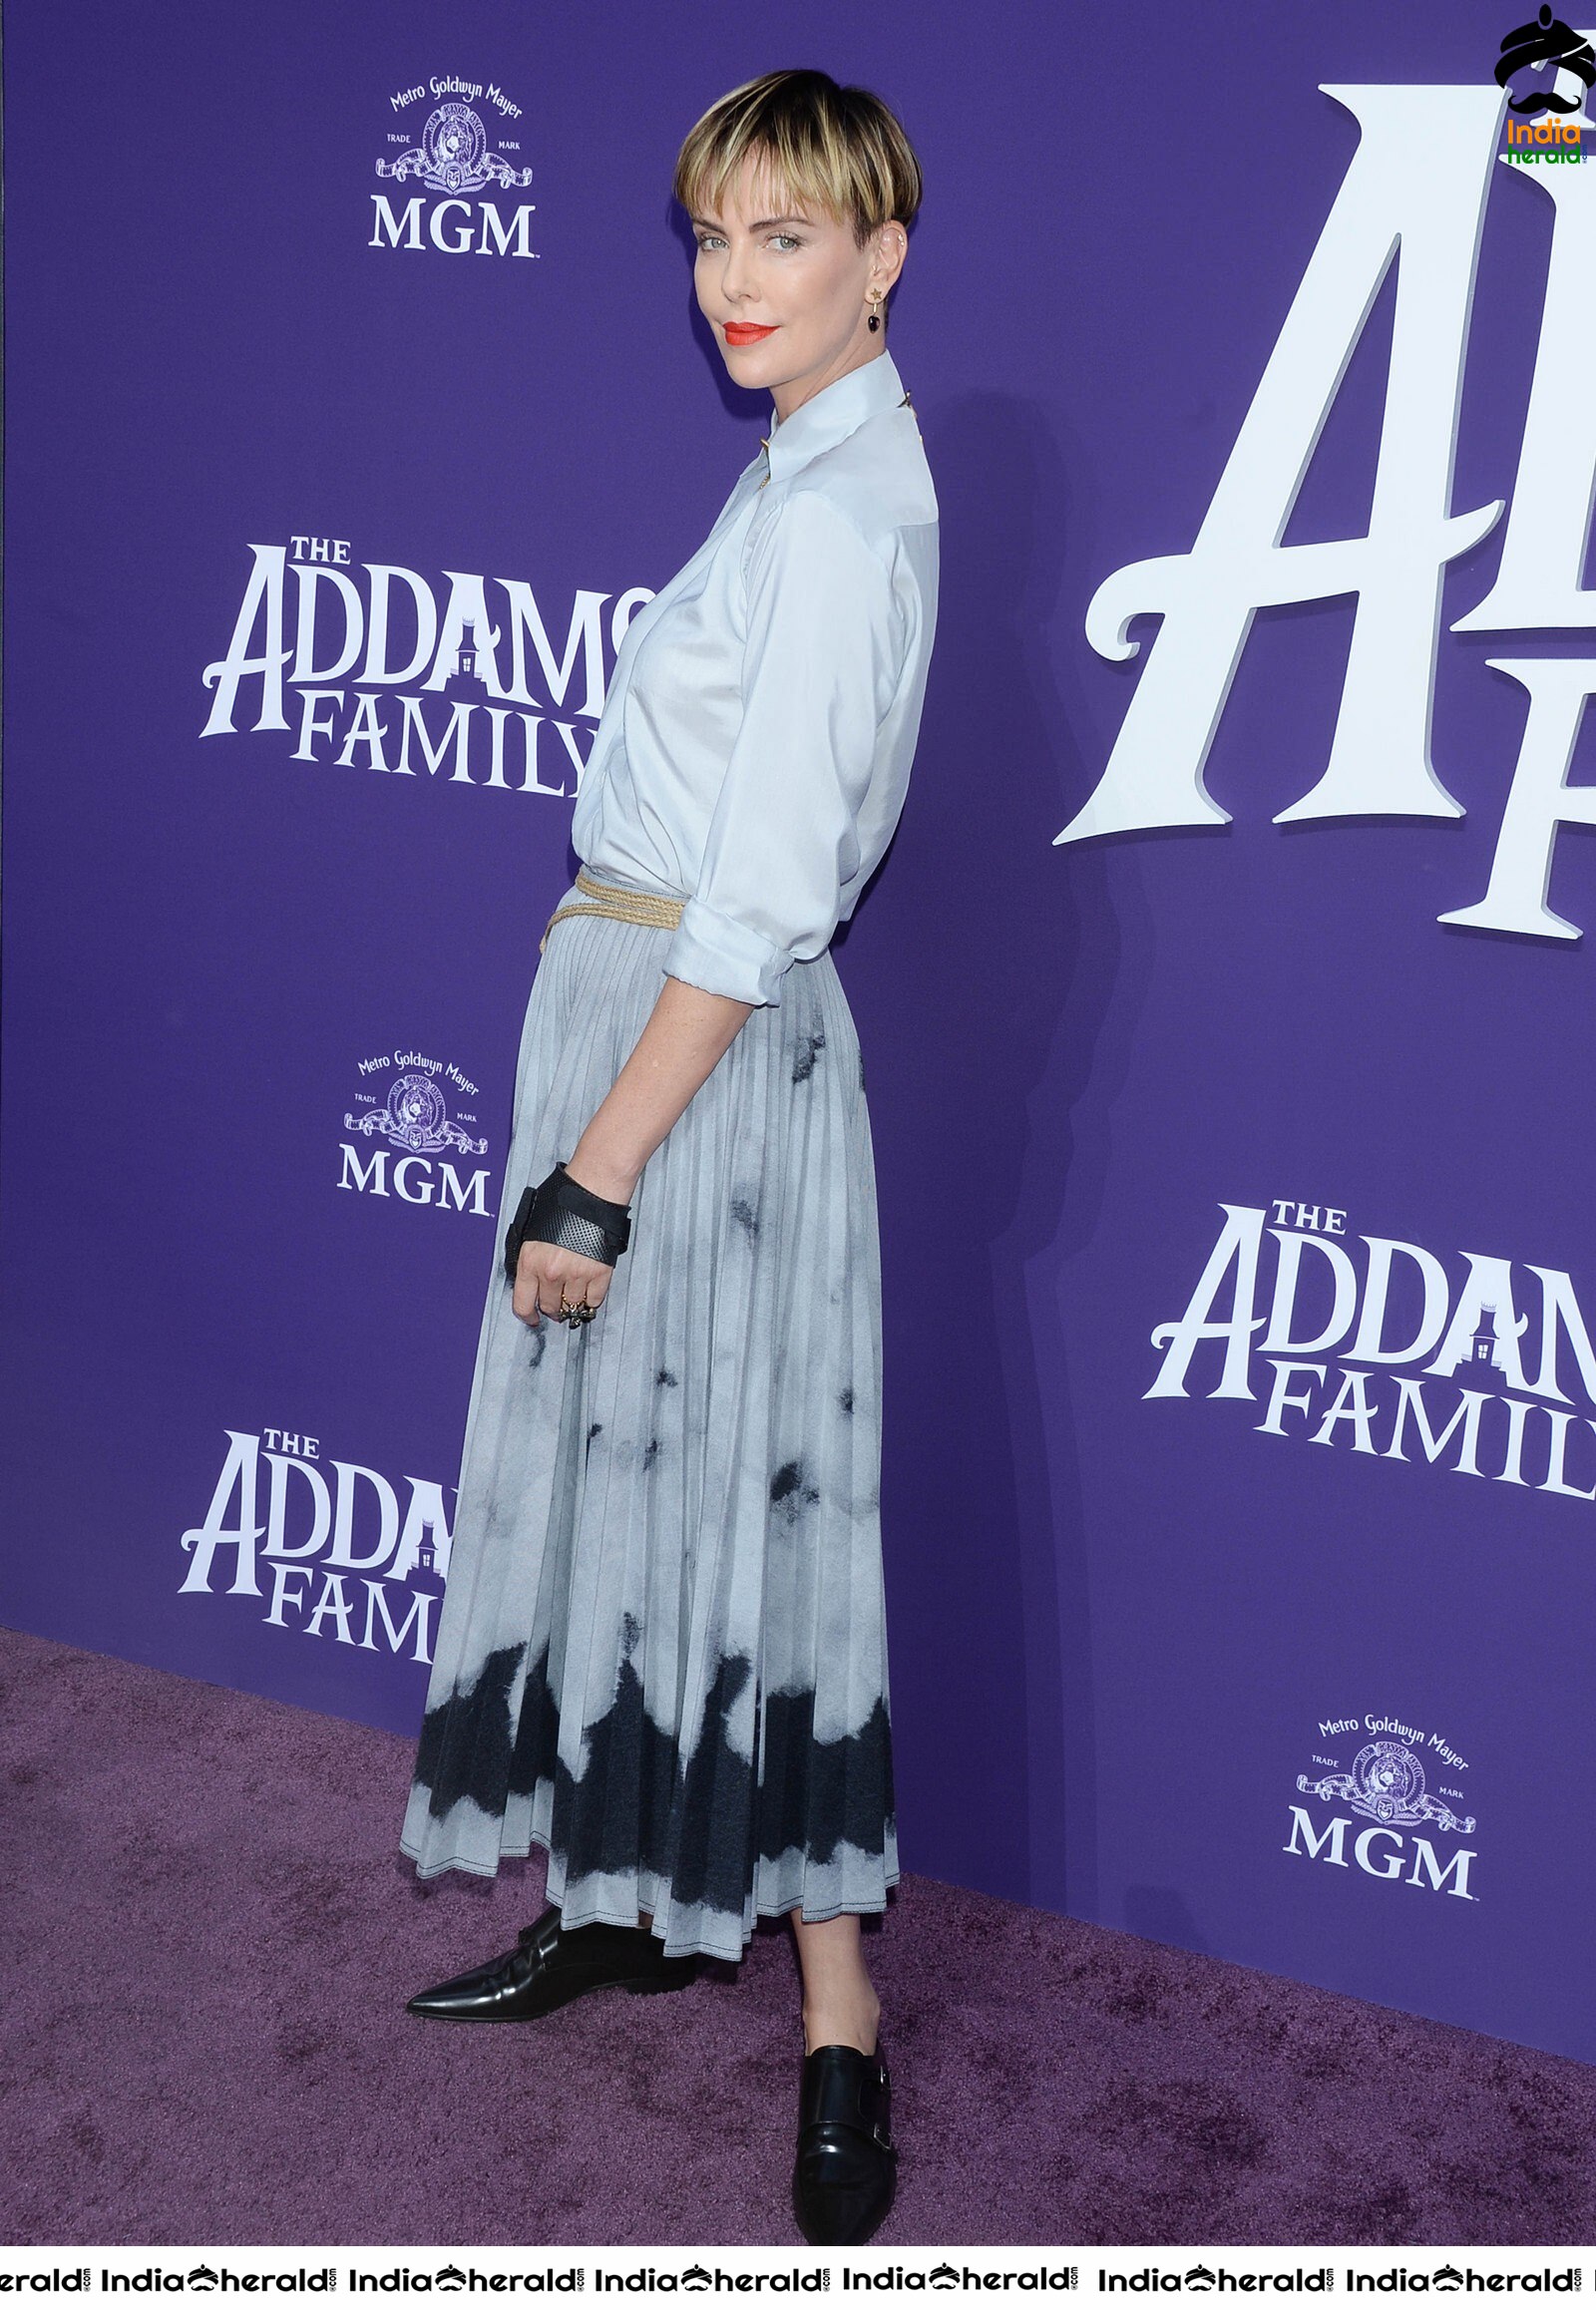 Charlize Theron in The Addams Family Premiere in Century City